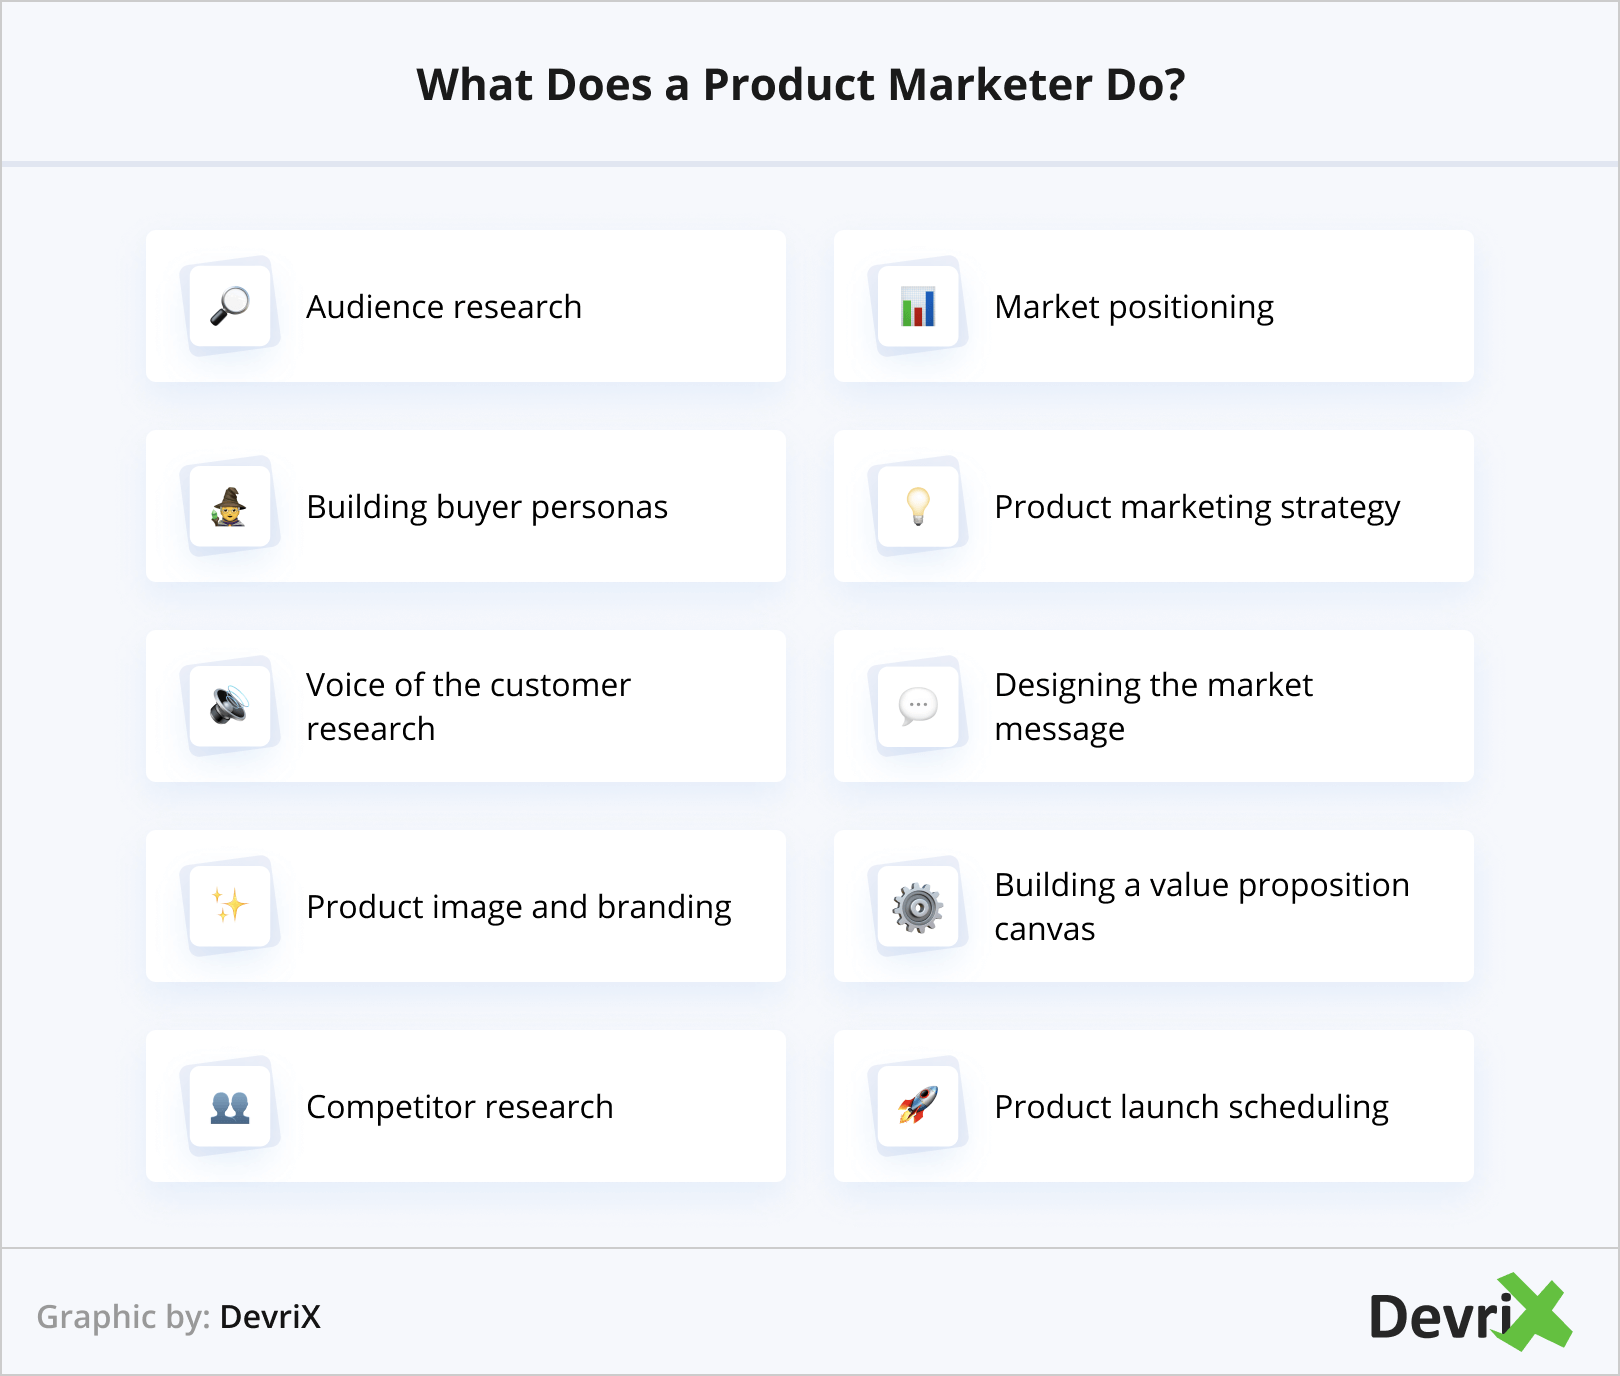 What Does a Product Marketer Do